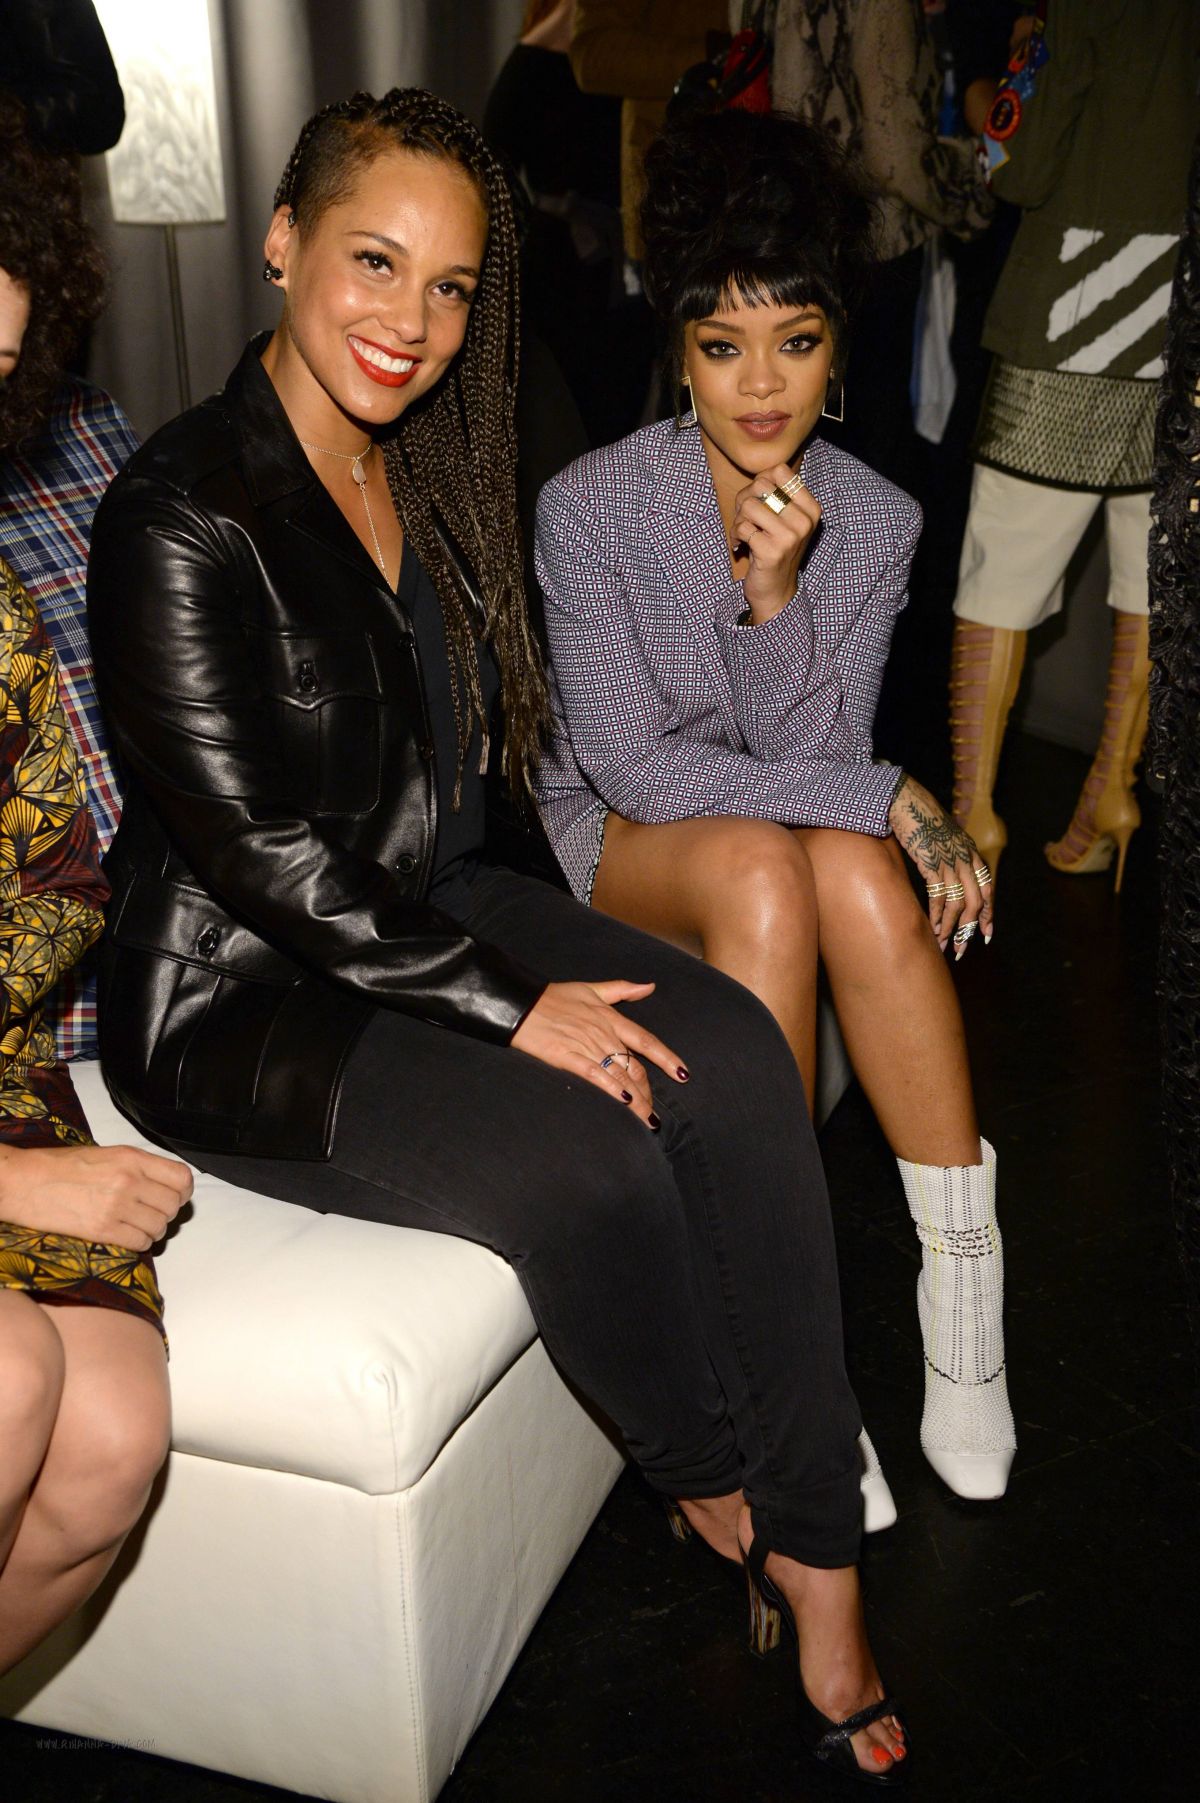 RIHANNA at Tidal Launch Event #tidalforall in New York ...